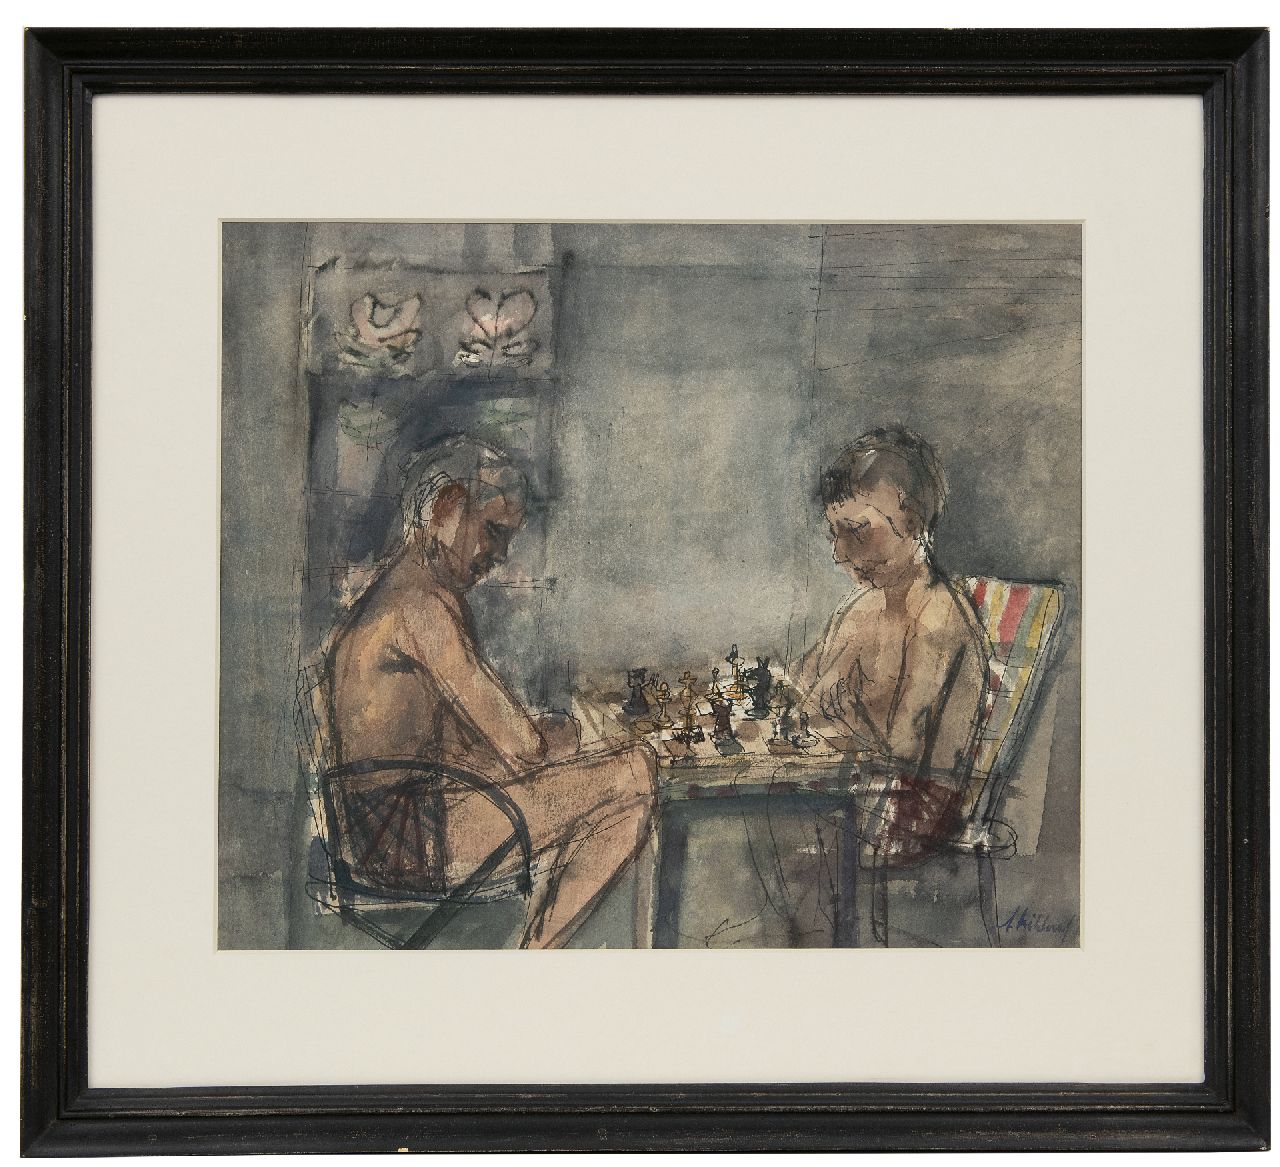 Kikkert A.  | Adriaan 'Ad' Kikkert | Watercolours and drawings offered for sale | Chess players in café Pardoel, Rotterdam, ink and watercolour on paper 30.7 x 41.6 cm